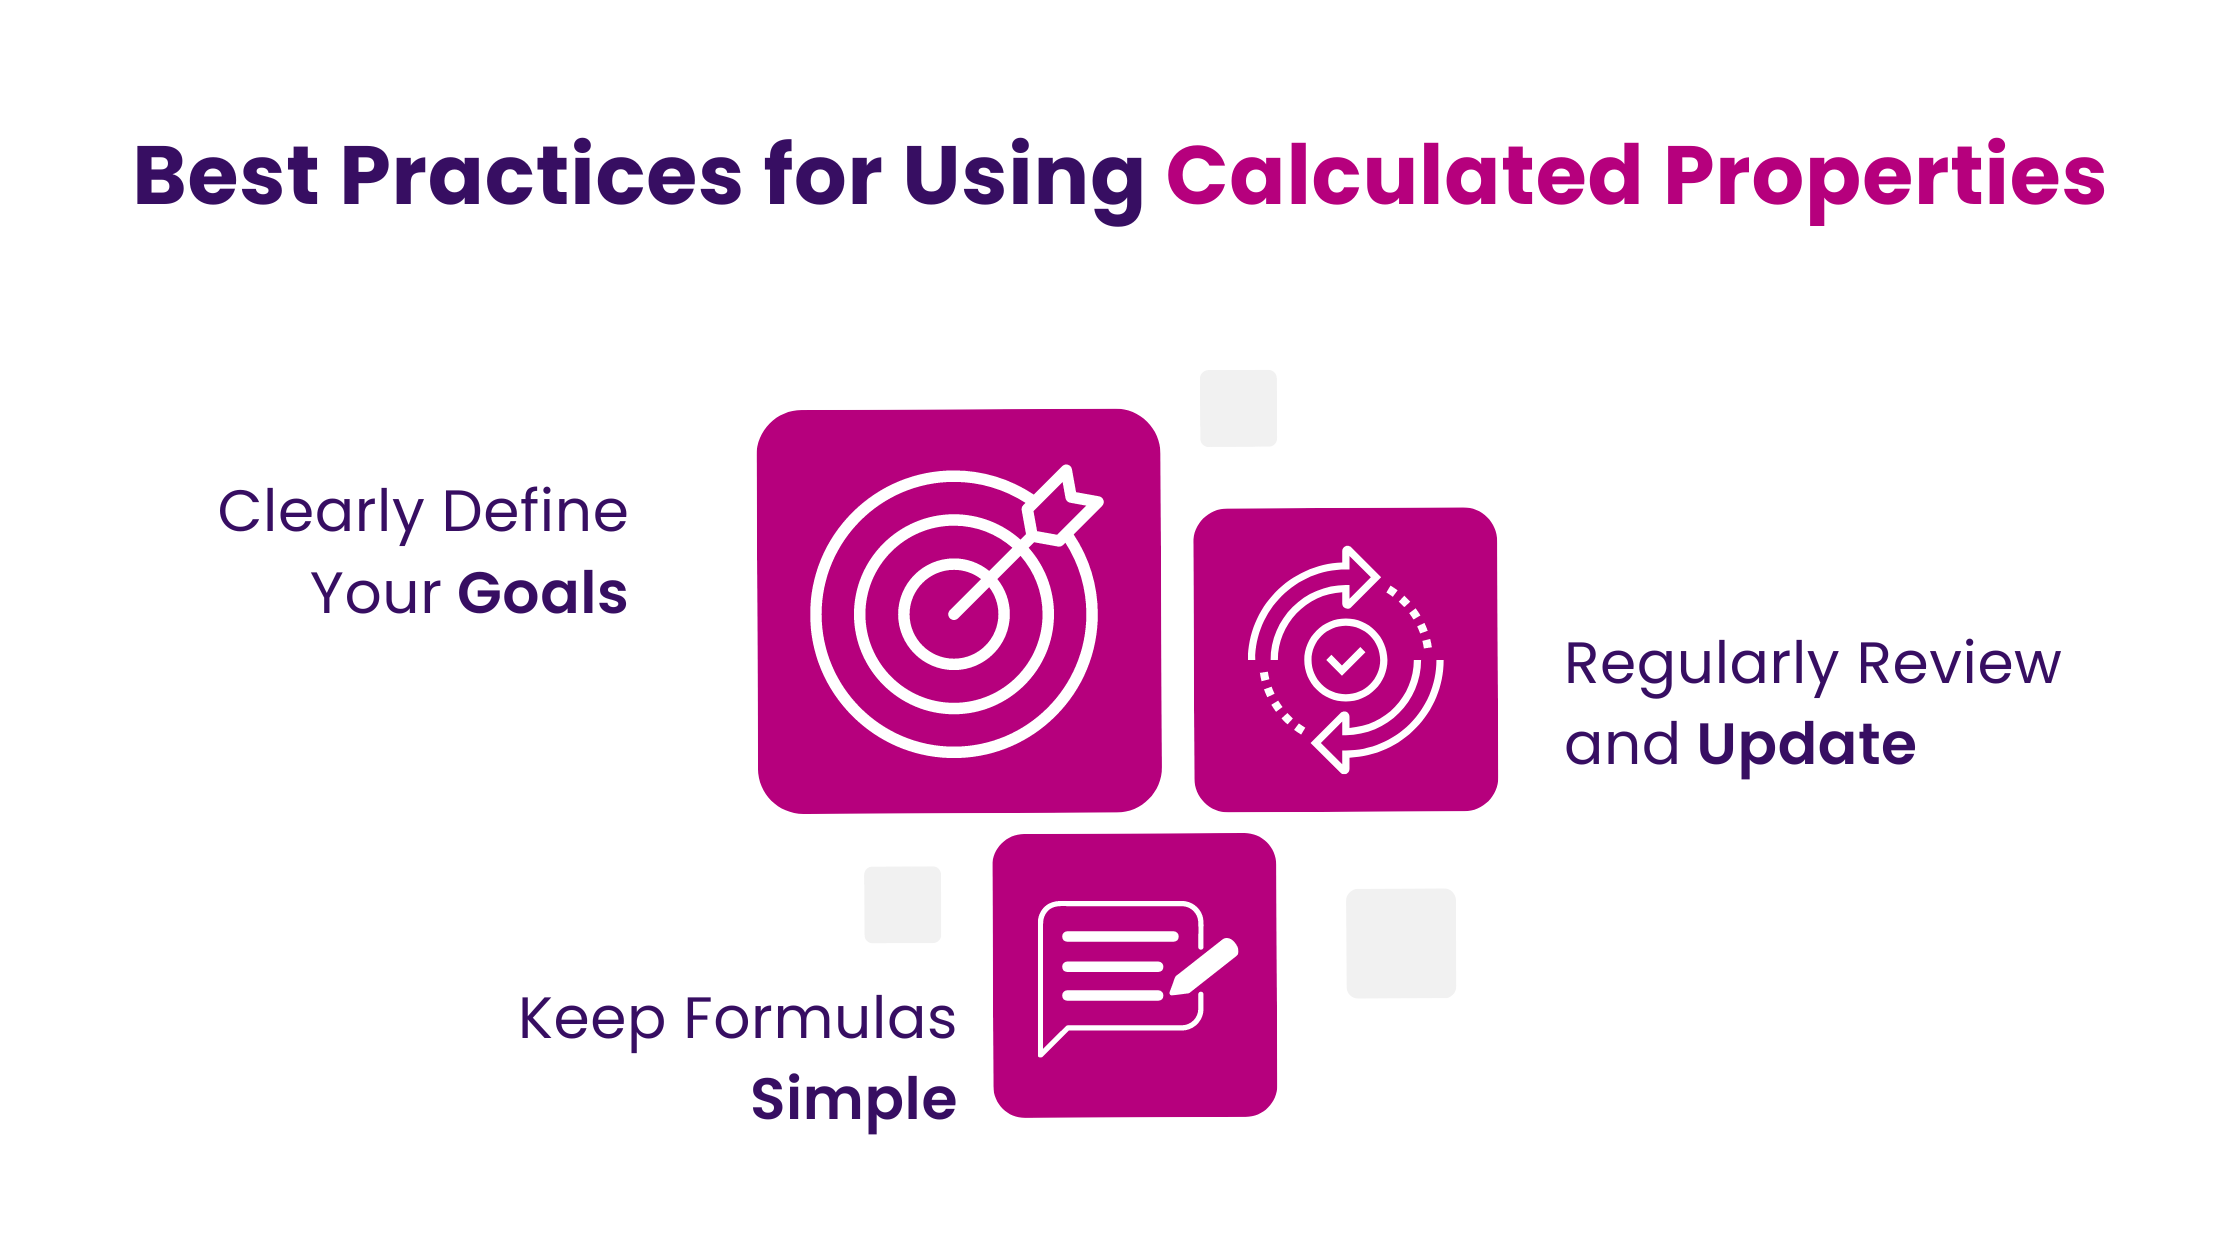 Best Practices for Using Calculated Properties